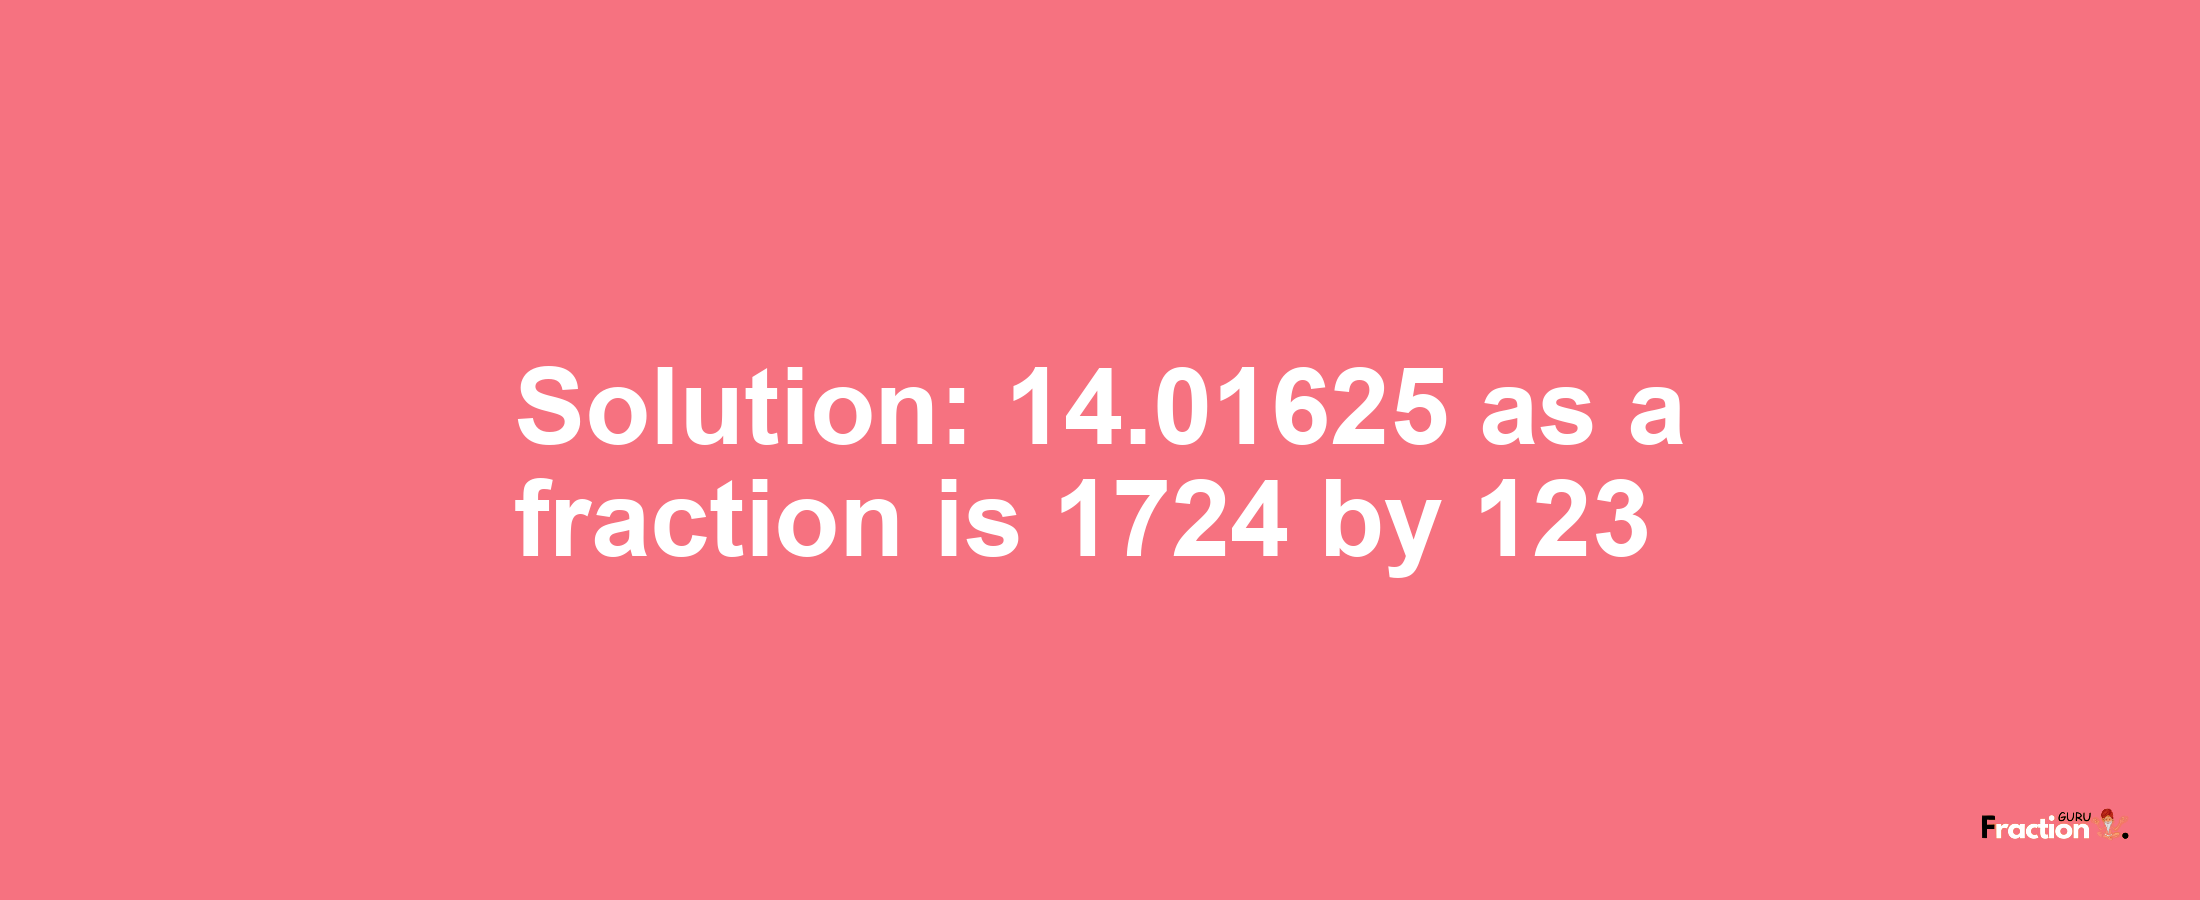 Solution:14.01625 as a fraction is 1724/123